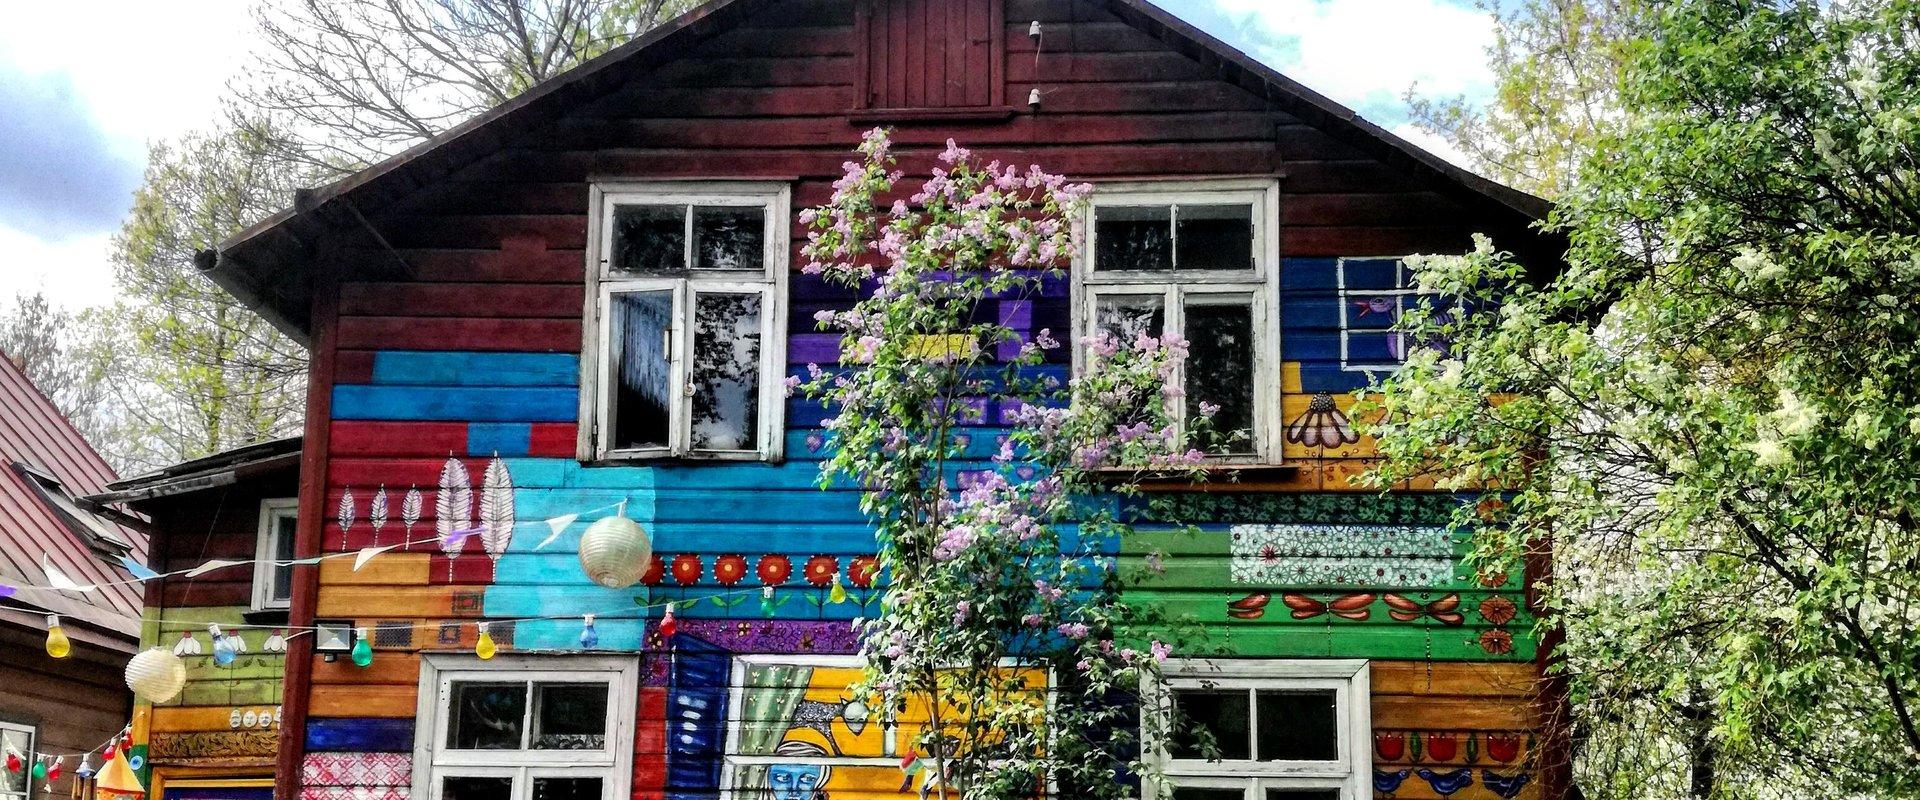 Supilinn – a district of wooden buildings with a wonderful milieu and colorufully decorated gardens